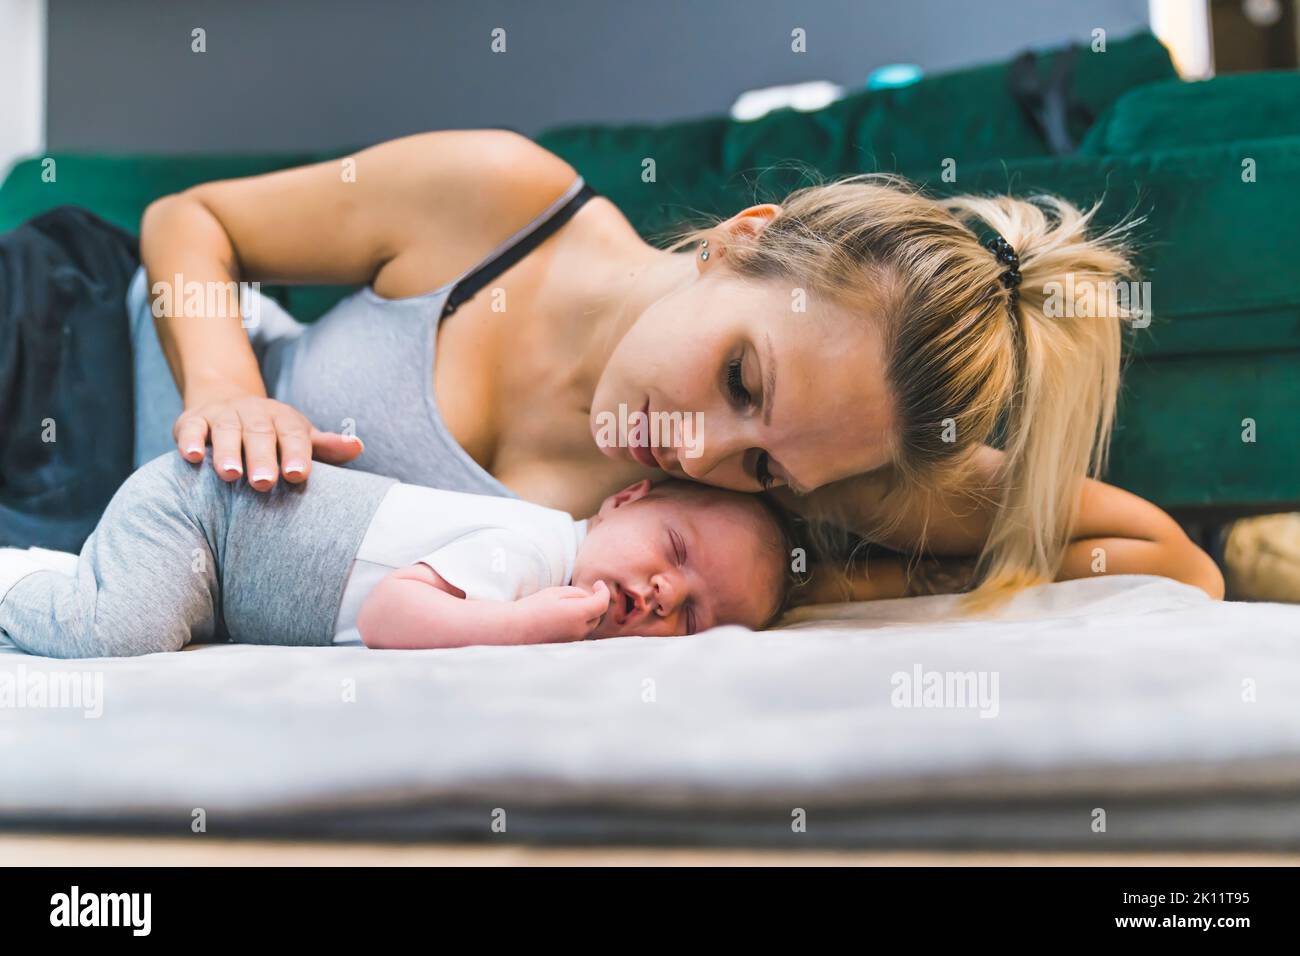 Adorable newborn baby boy with cute brown hair, sleeping peacefully on his stomach on a bed at home with his young caucasian mom laying with him, gently touching and hugging her son. High quality photo Stock Photo